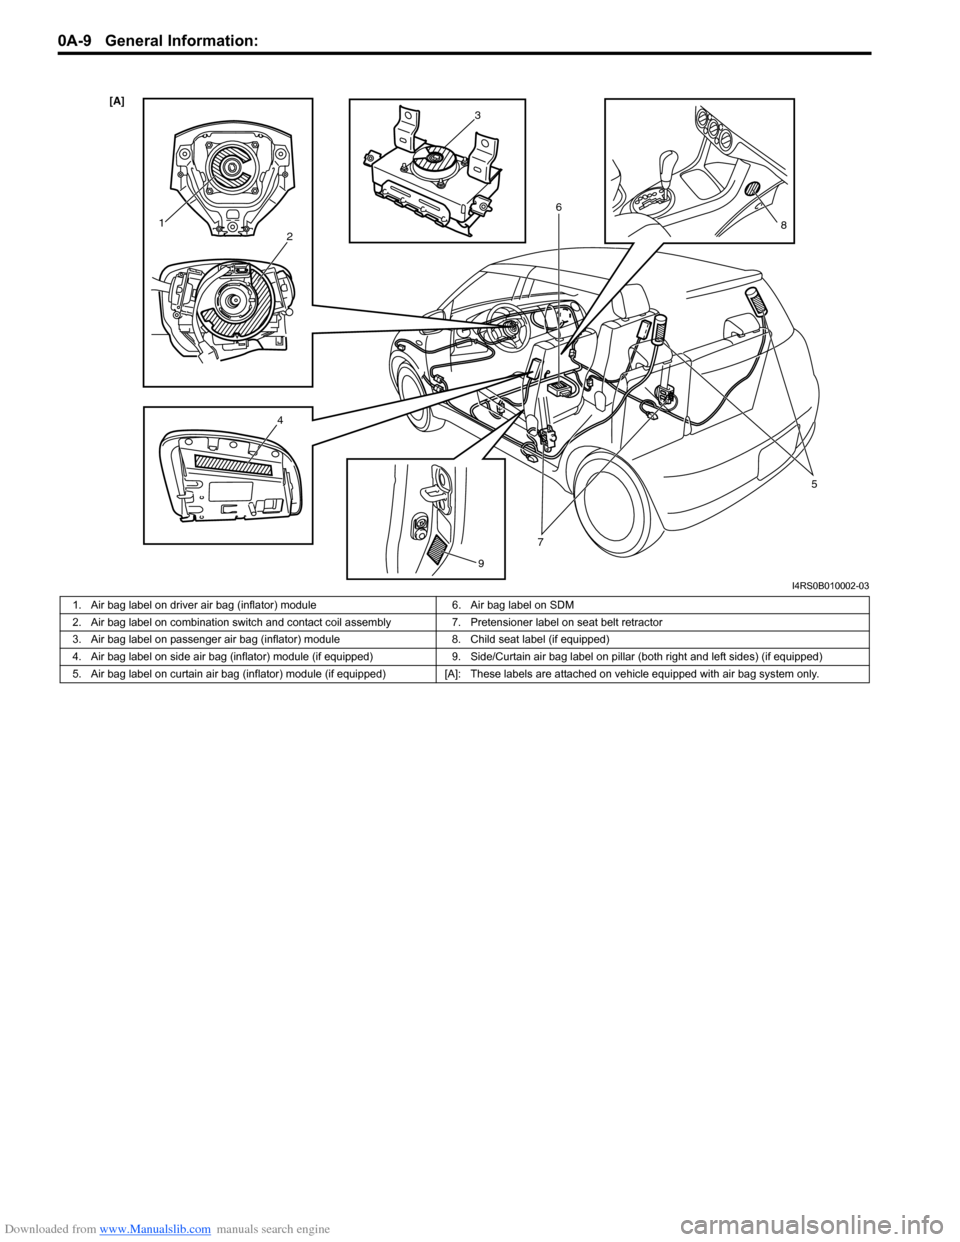 SUZUKI SWIFT 2007 2.G Service Workshop Manual Downloaded from www.Manualslib.com manuals search engine 0A-9 General Information: 
[A] 
12
4 5
6
7 8
9
3
I4RS0B010002-03
1. Air bag label on driver air bag (inflator) module 6. Air bag label on SDM
2